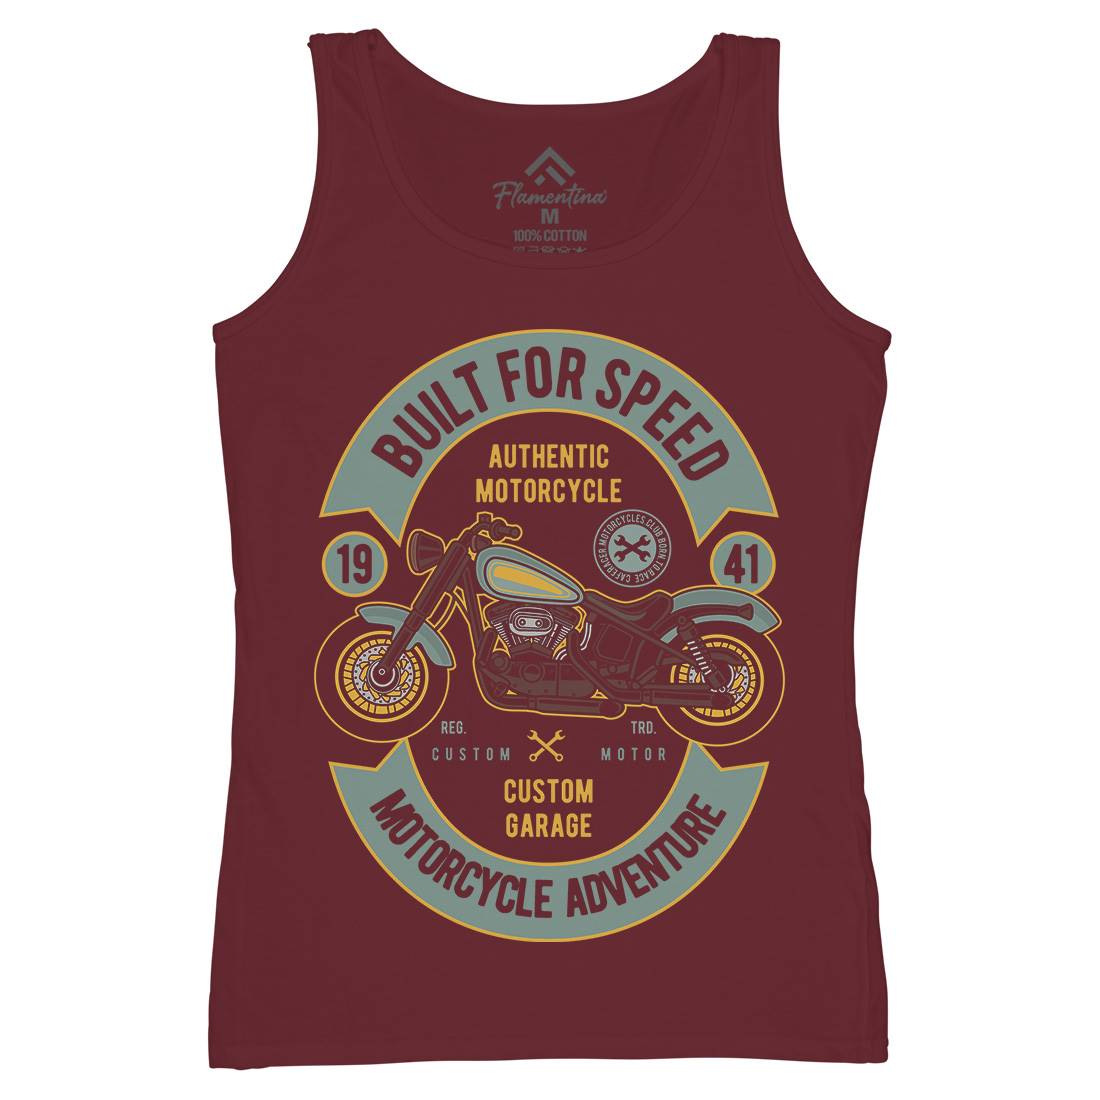 Built For Speed Womens Organic Tank Top Vest Motorcycles D512